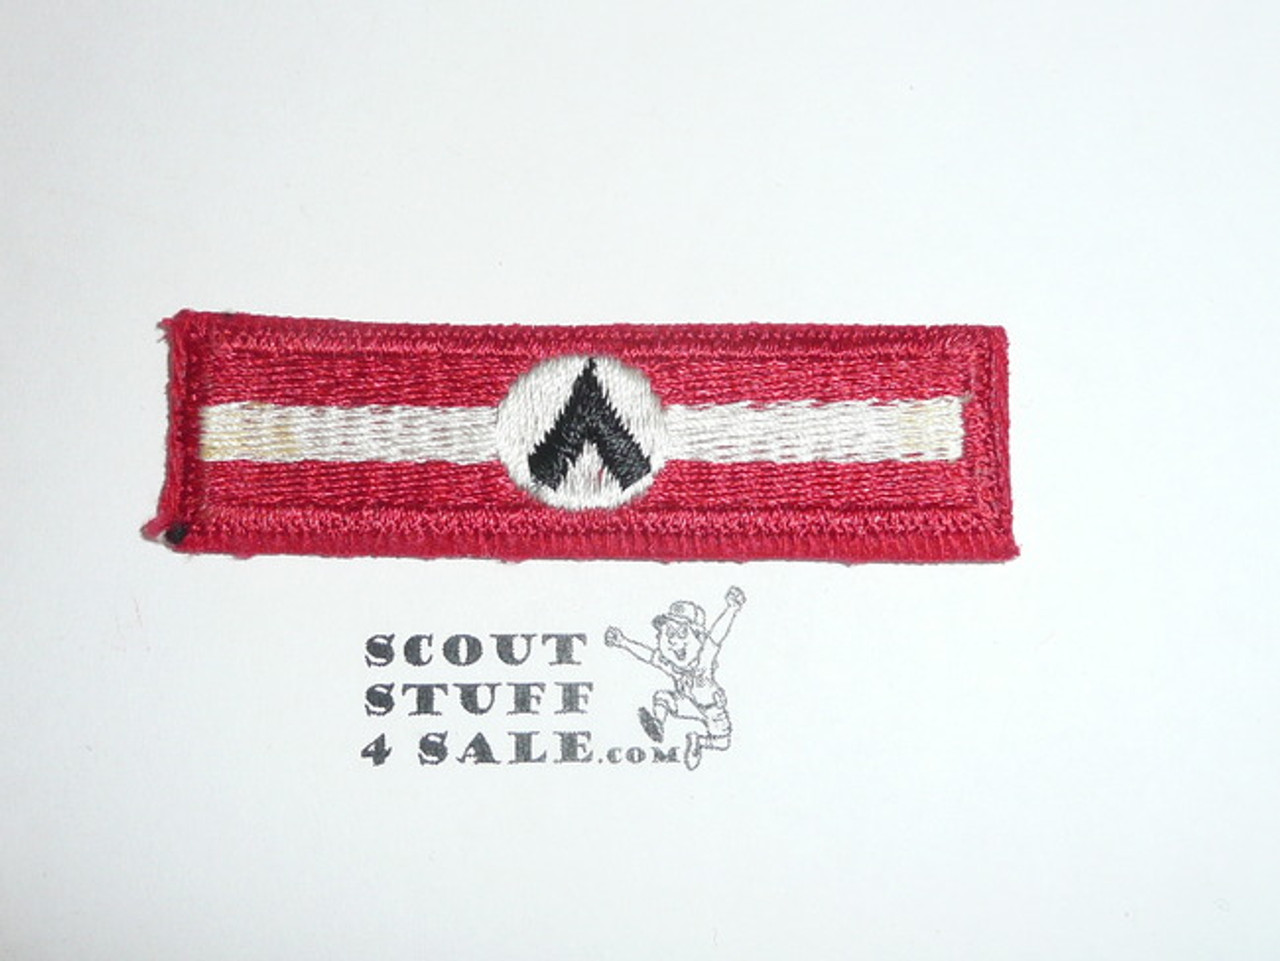 Explorer Scout Rating Strip Patch, 1950's, Outdoor Skills